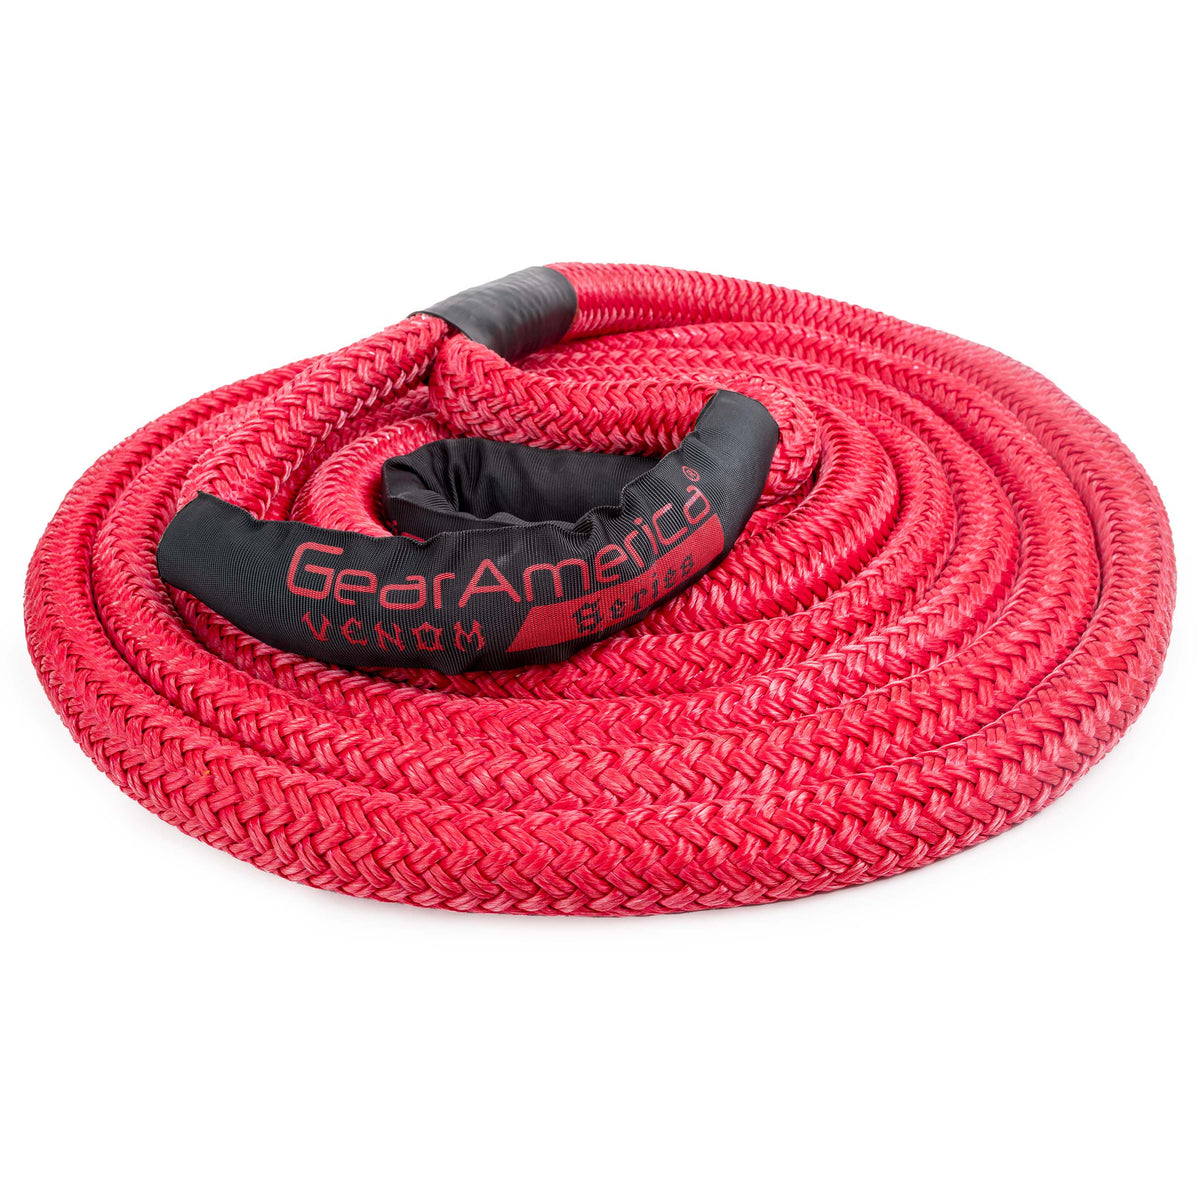 Series　Rope　Duty　30　Recovery　in　Heavy　GearAmerica　X　USA-　Venom　The　Red　1.25´´　Kinetic　Made